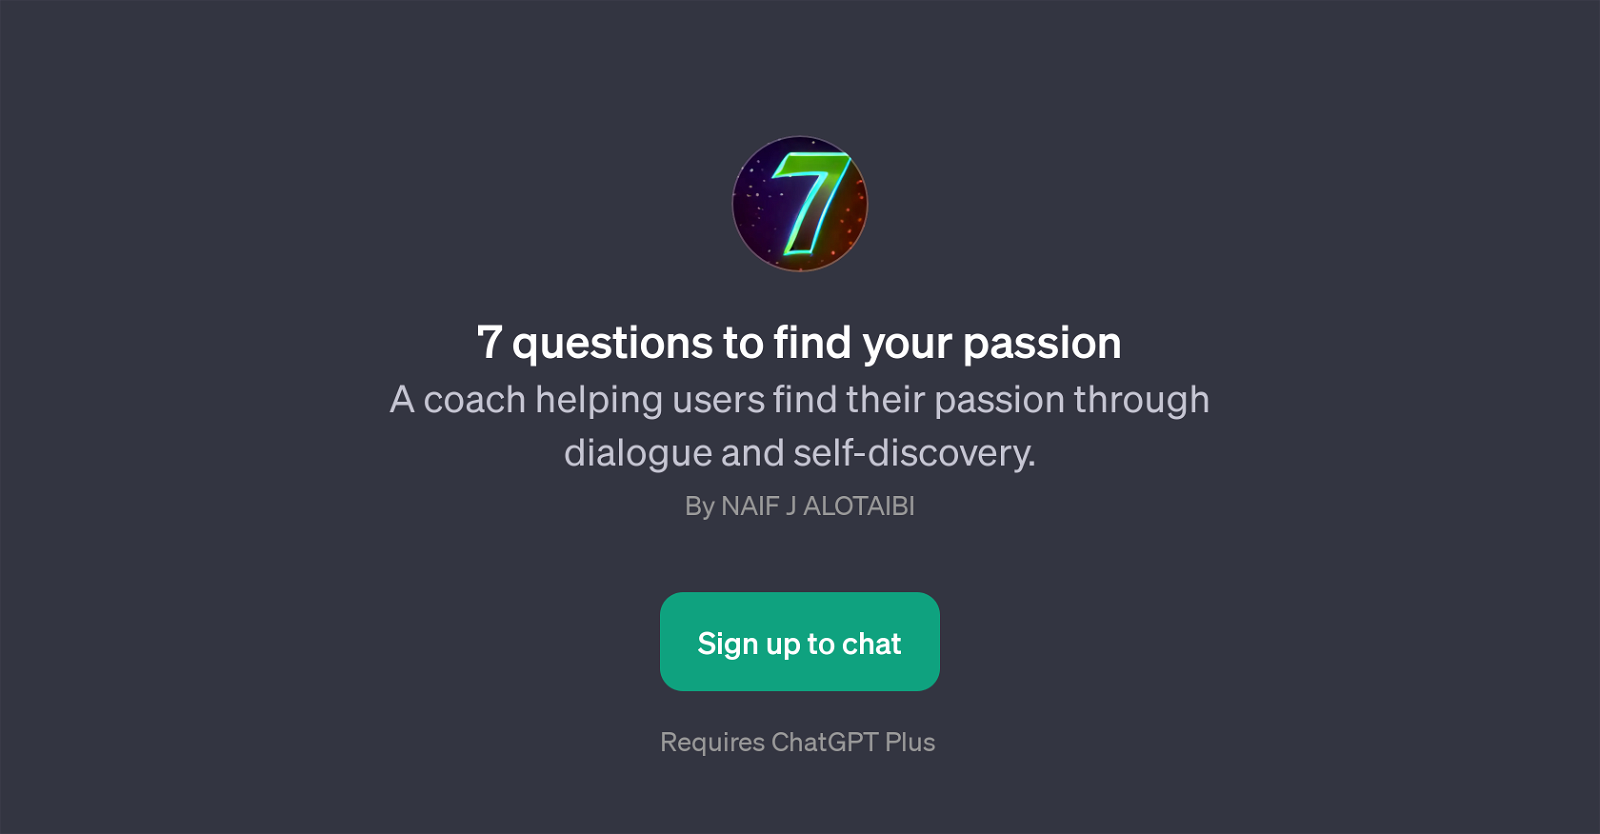 7 questions to find your passion website